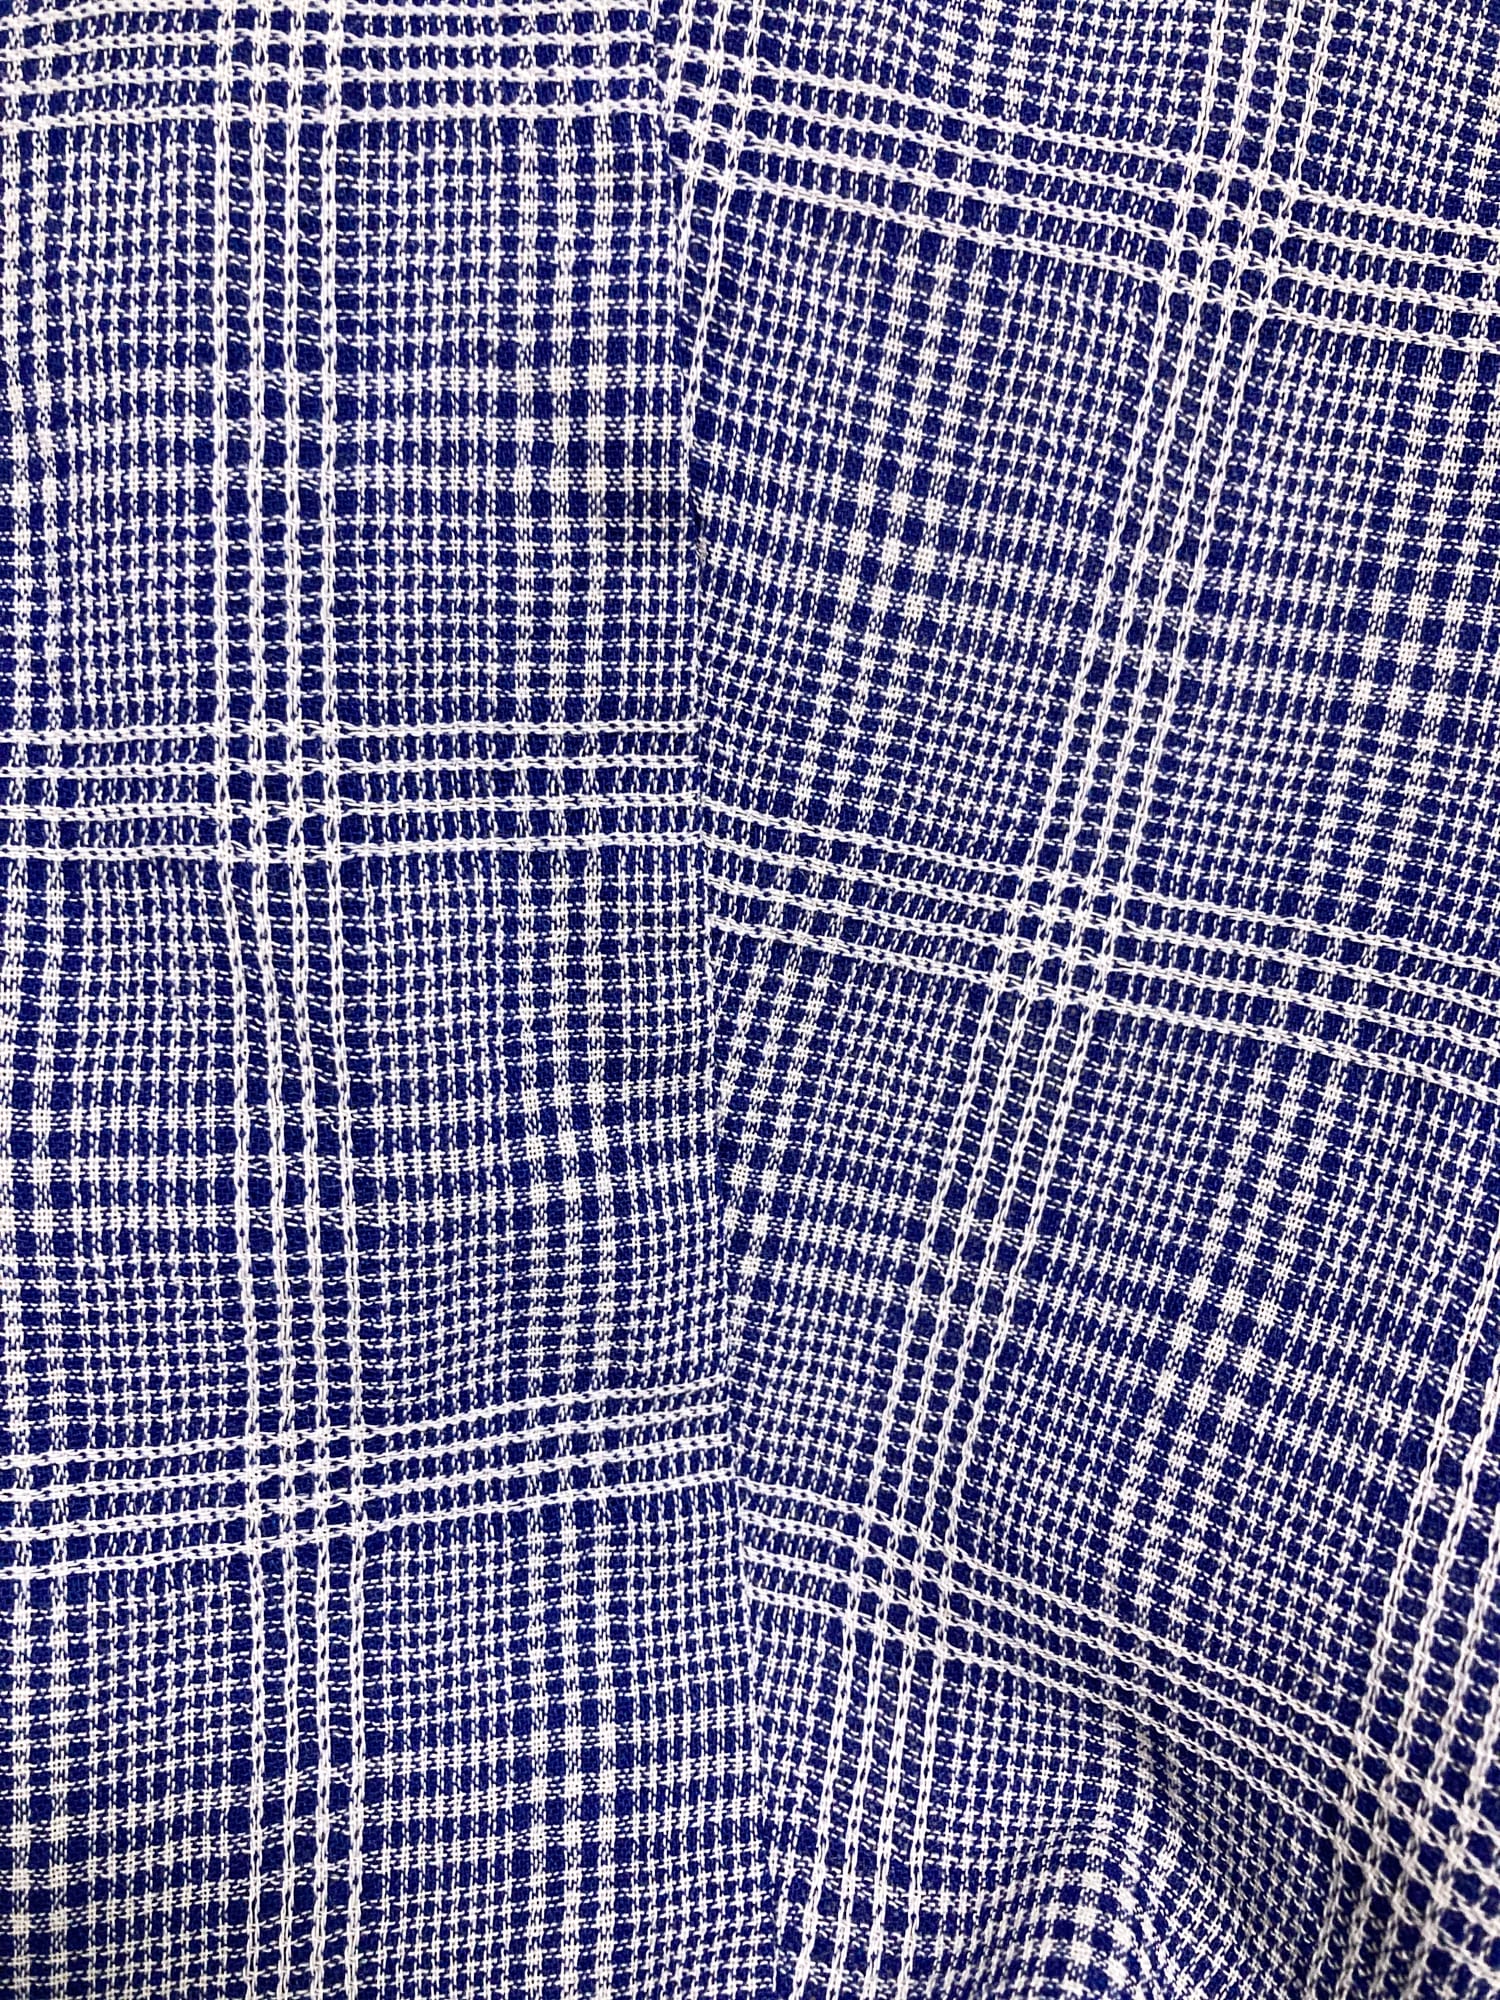 Tricot Comme des Garcons 1995 blue white check wool shirt jacket